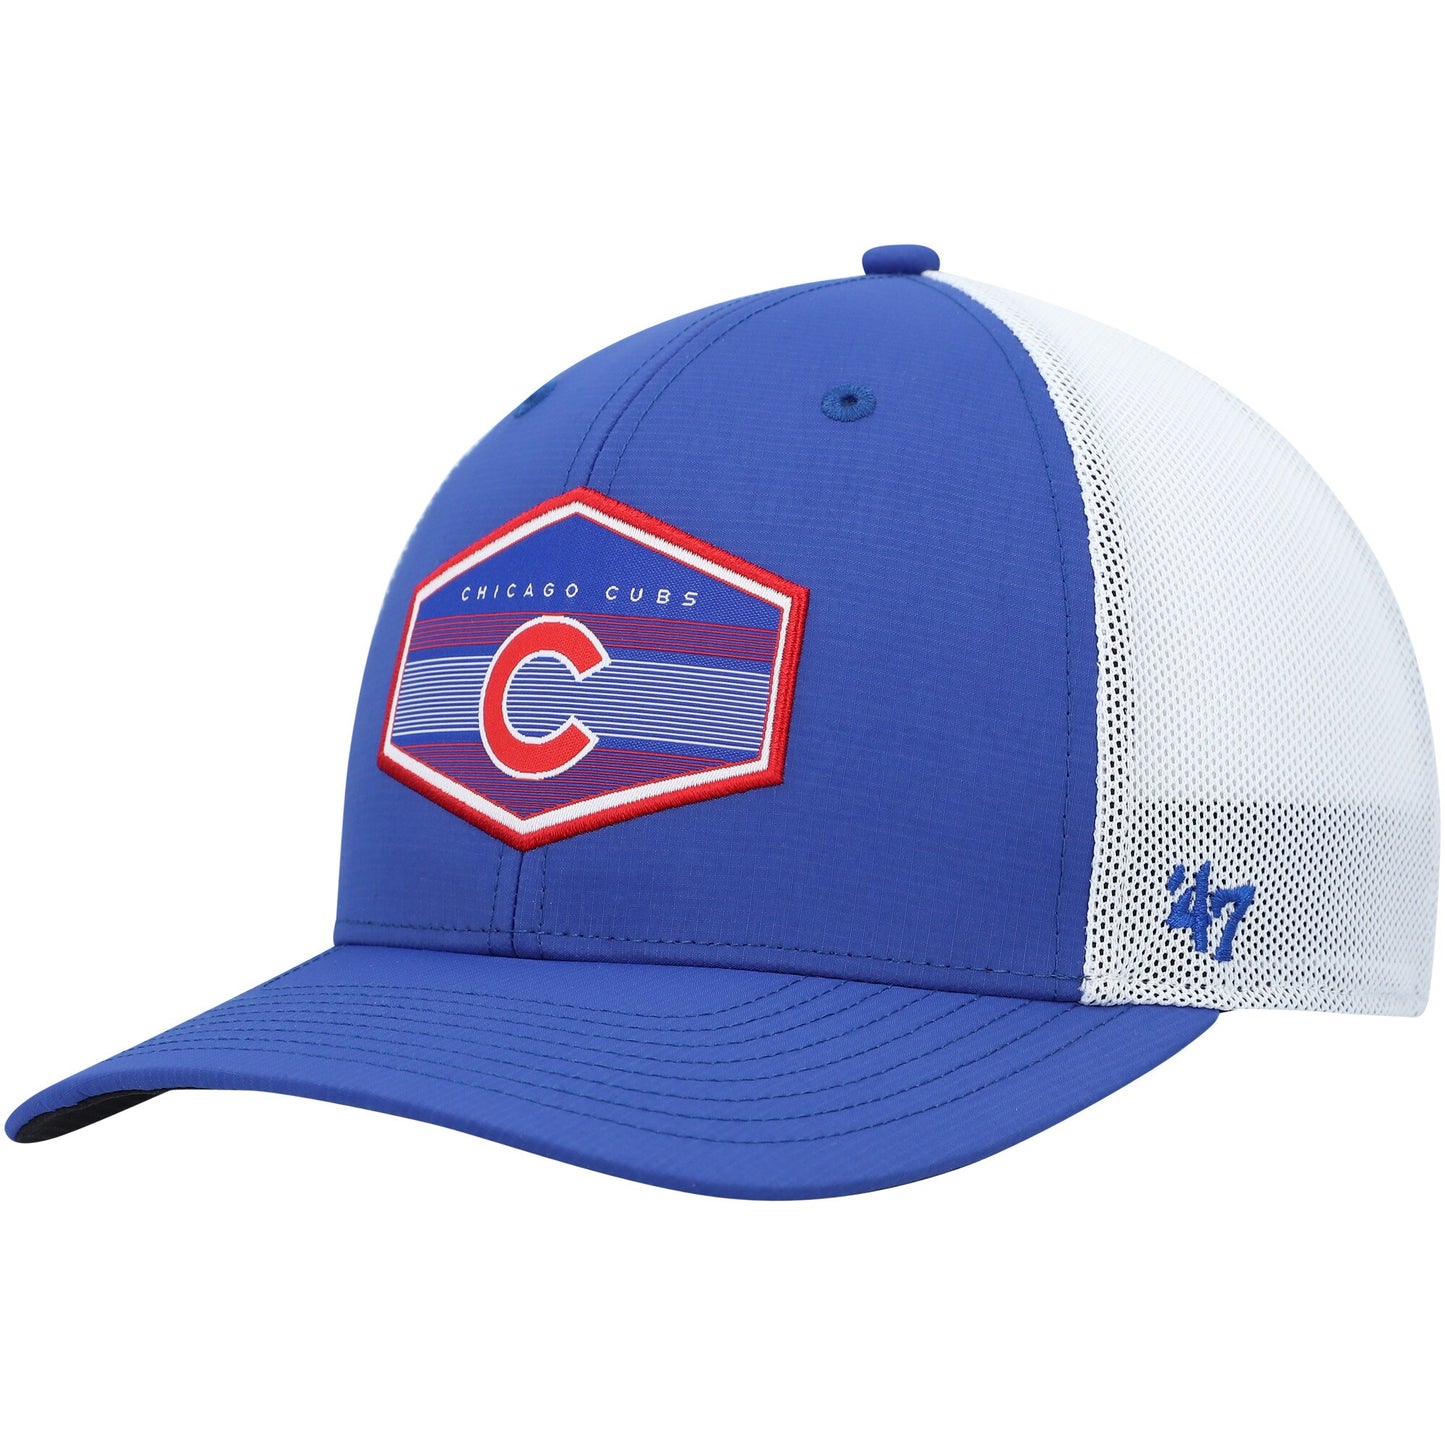 Chicago Cubs '47 Burgess Trucker Snapback Hat - Royal/White